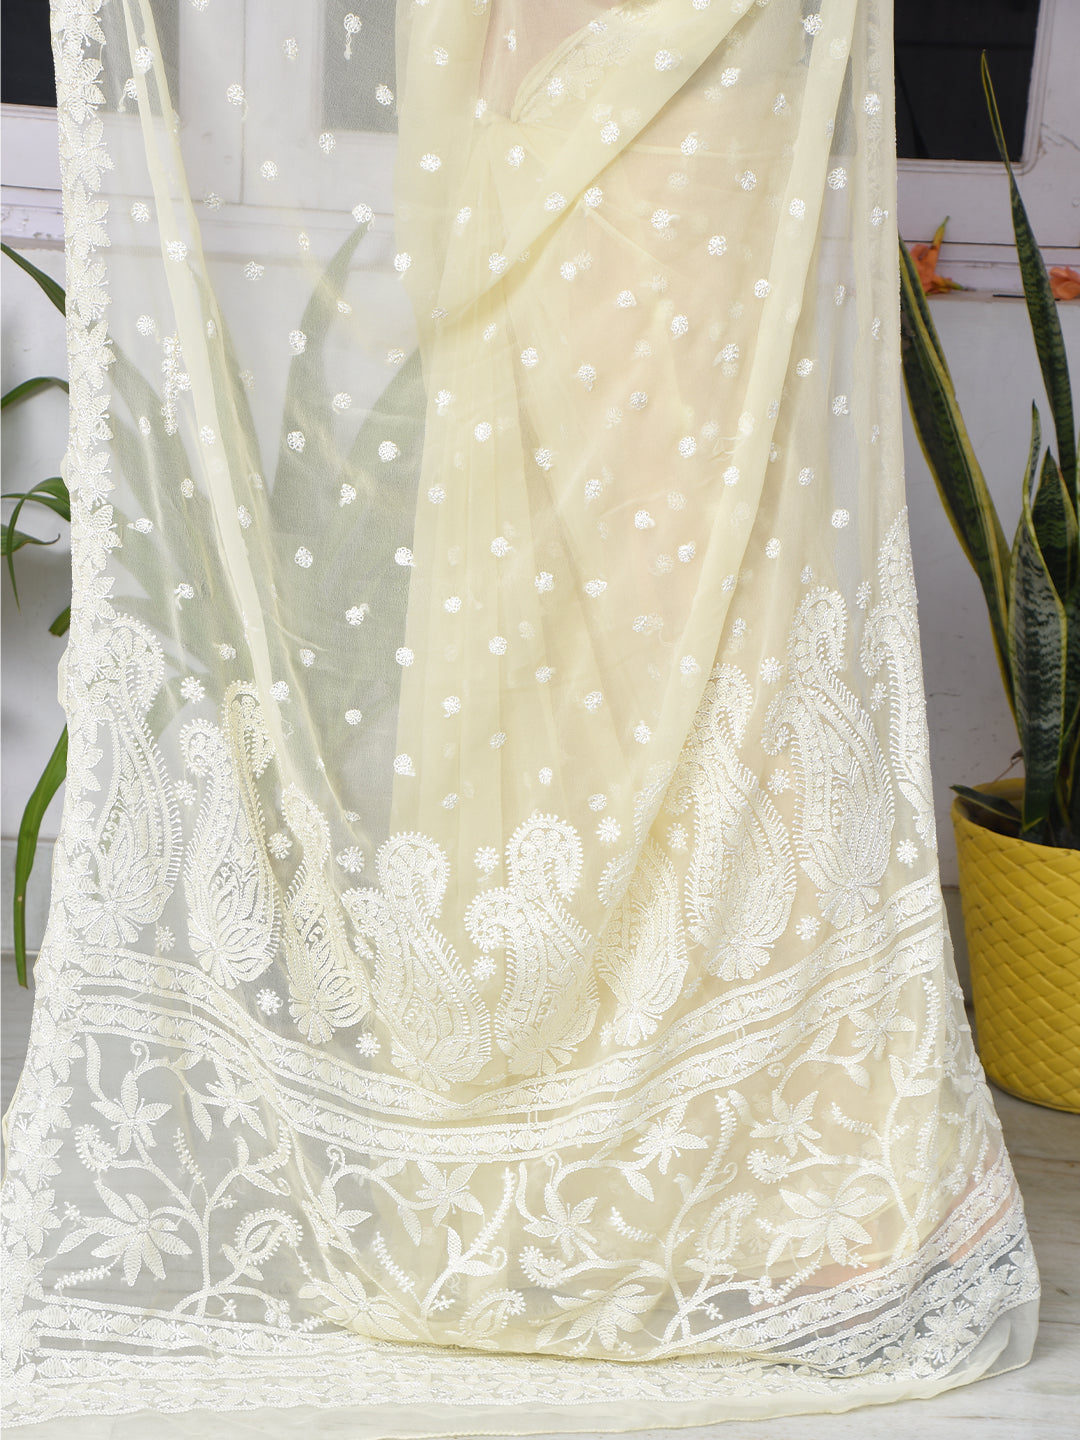 Light Yellow Georgette Chikankari Saree with self-color embroidery